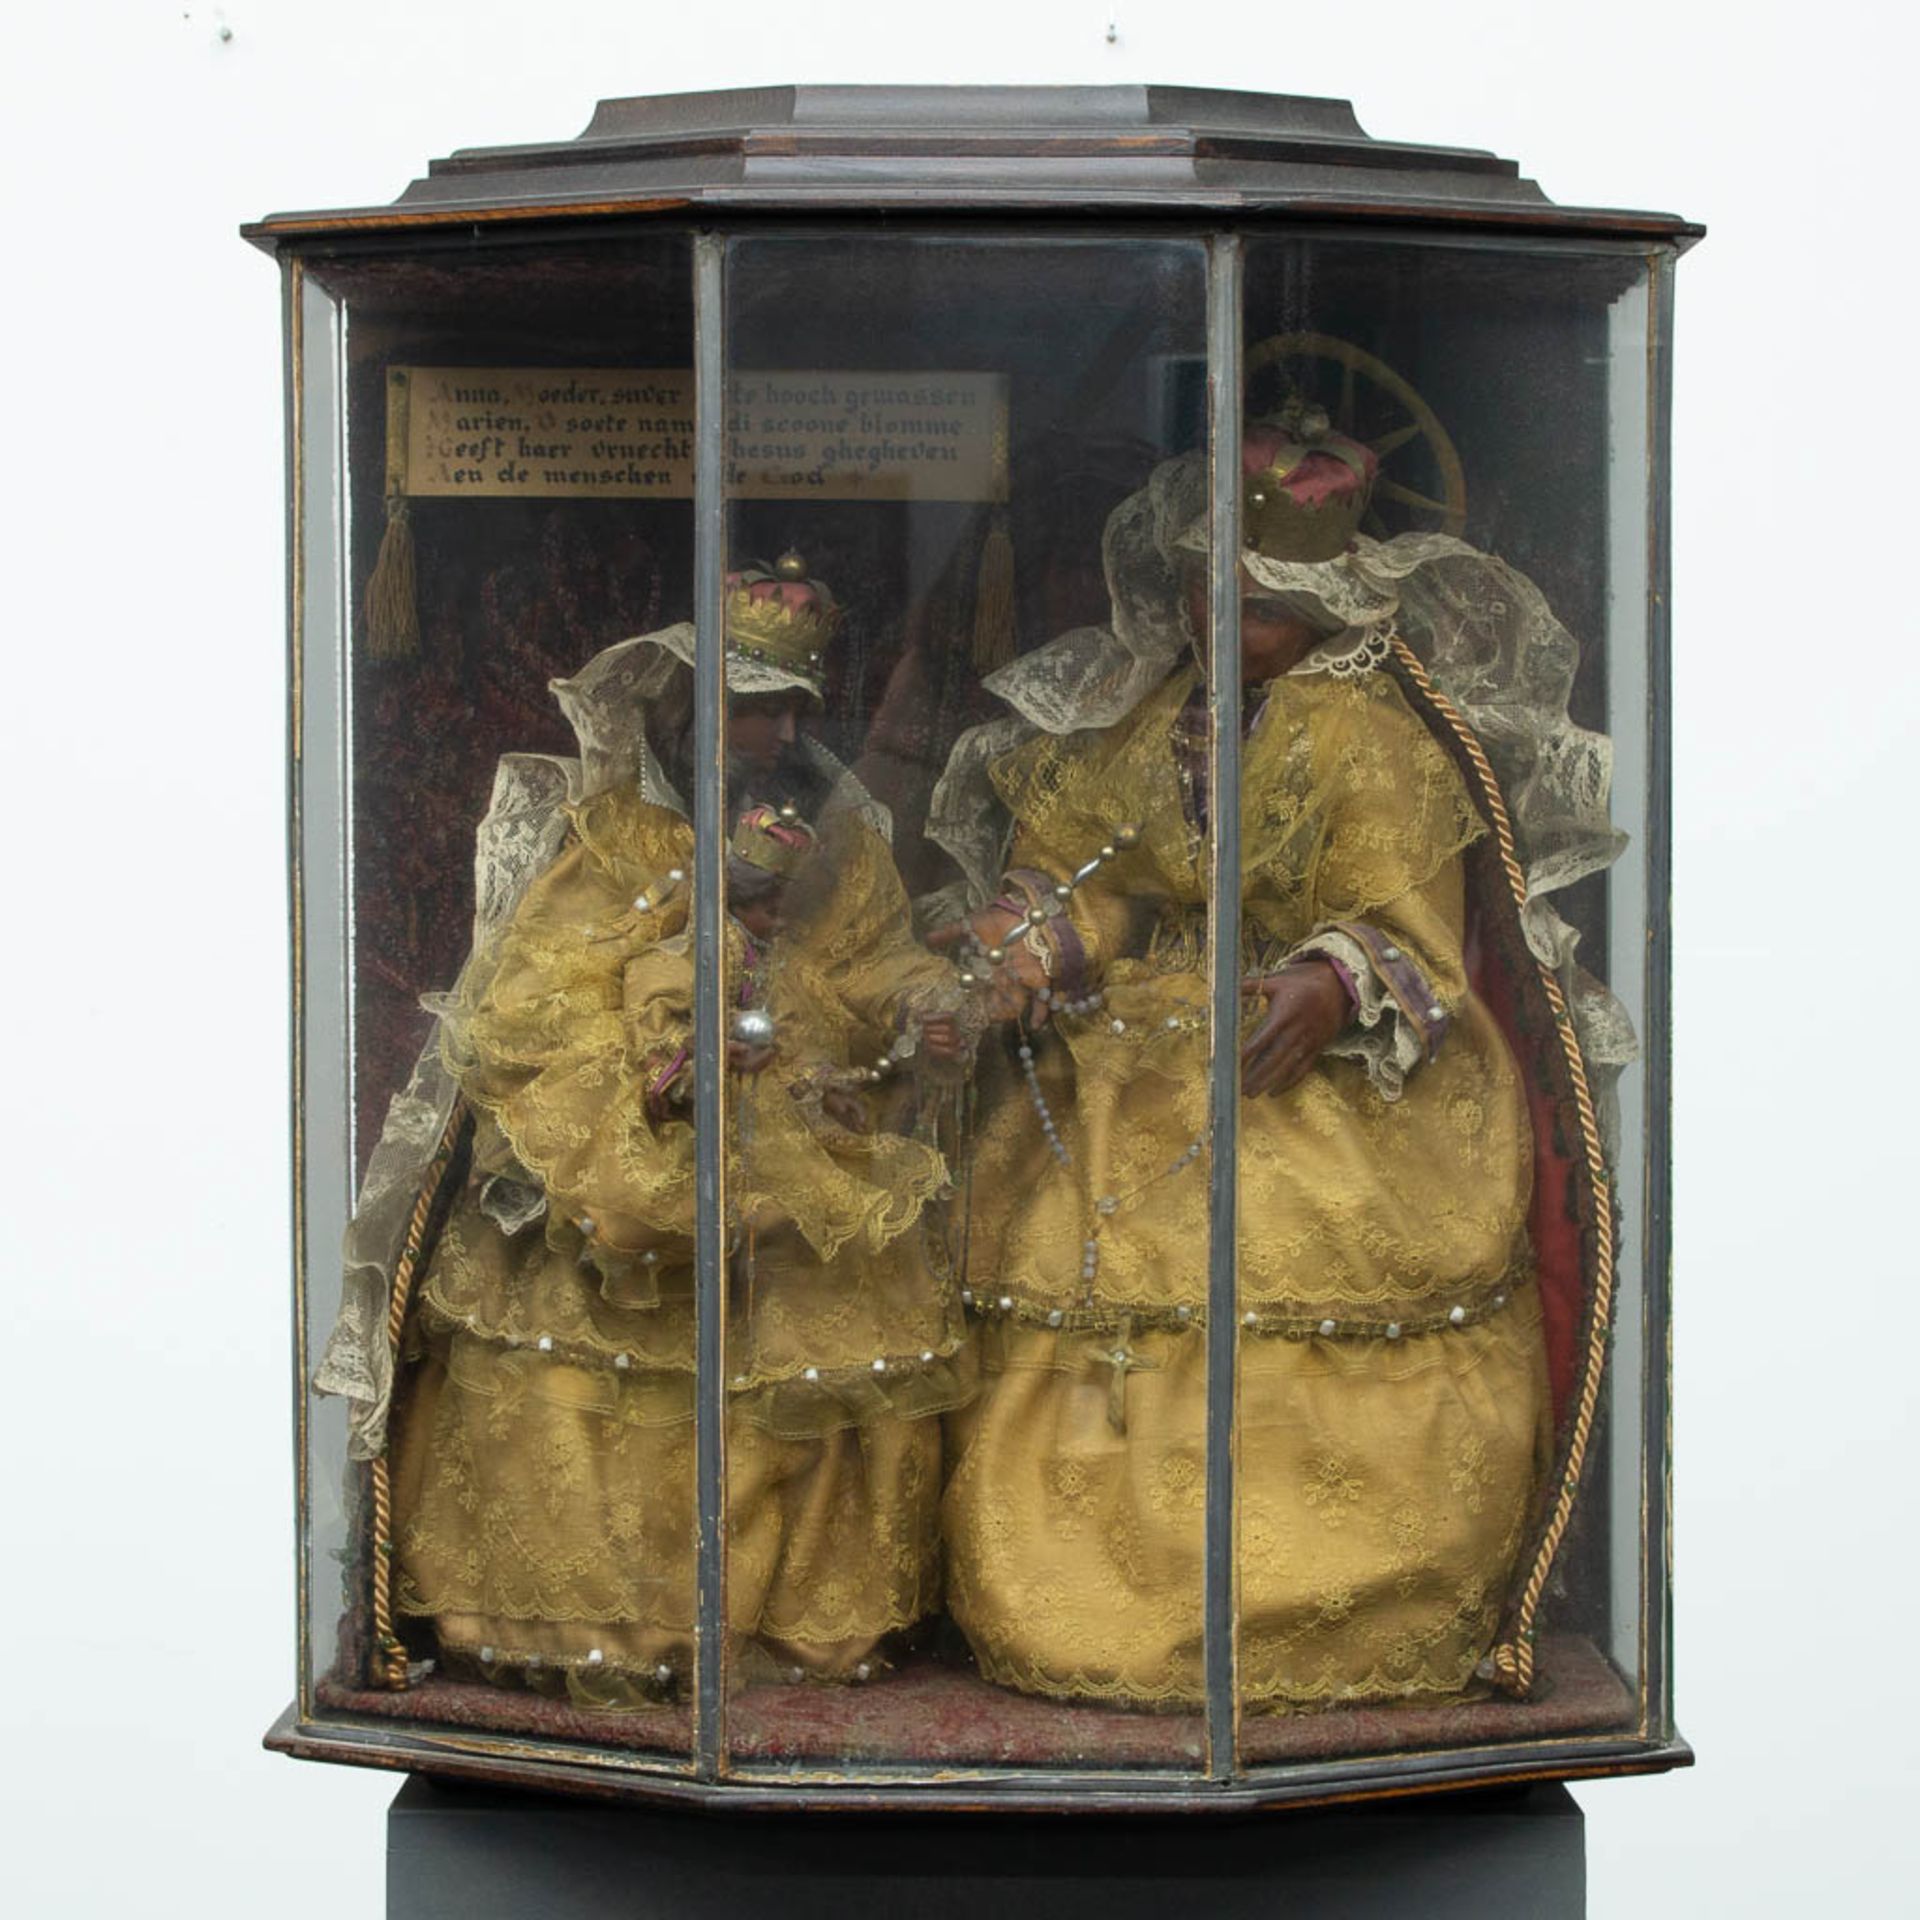 A shrine, with a Collection of 3 wax statues - Image 7 of 13